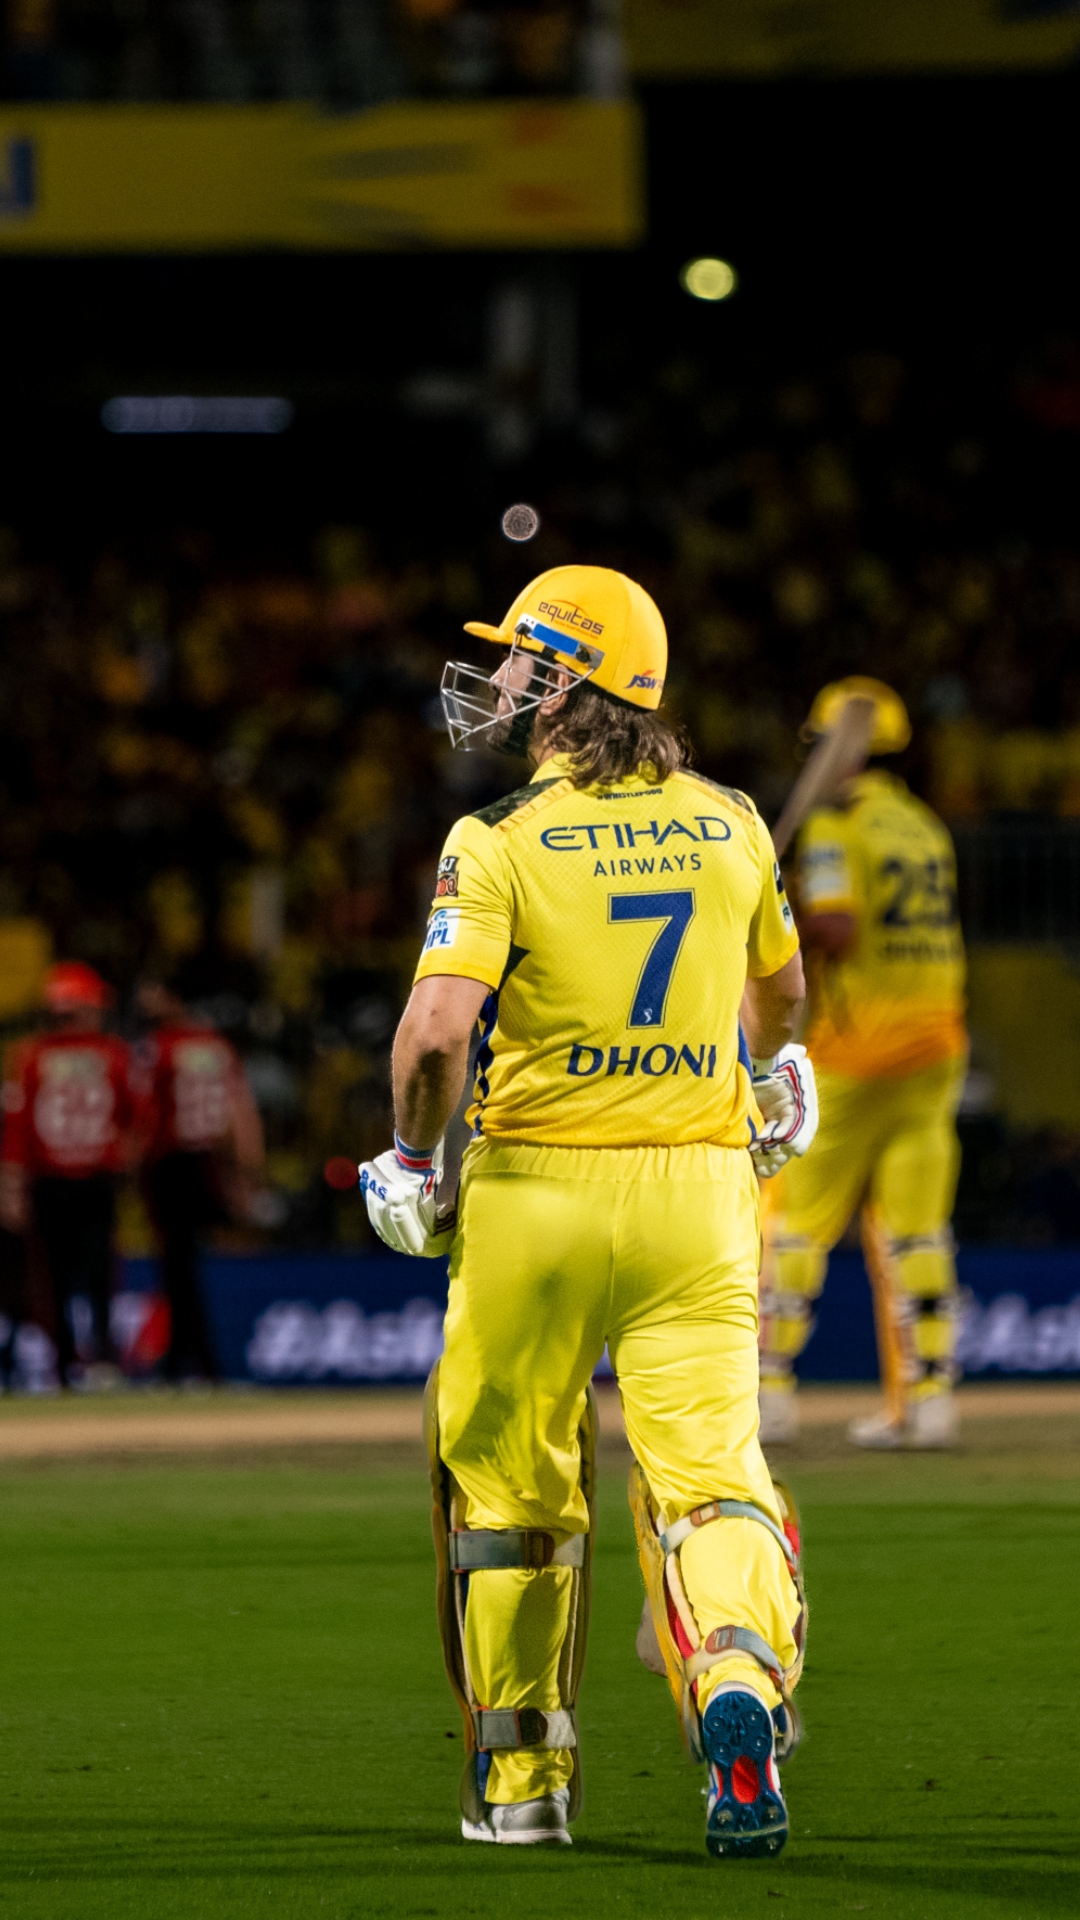 MS Dhoni becomes first player to script never-seen-before record in IPL history
